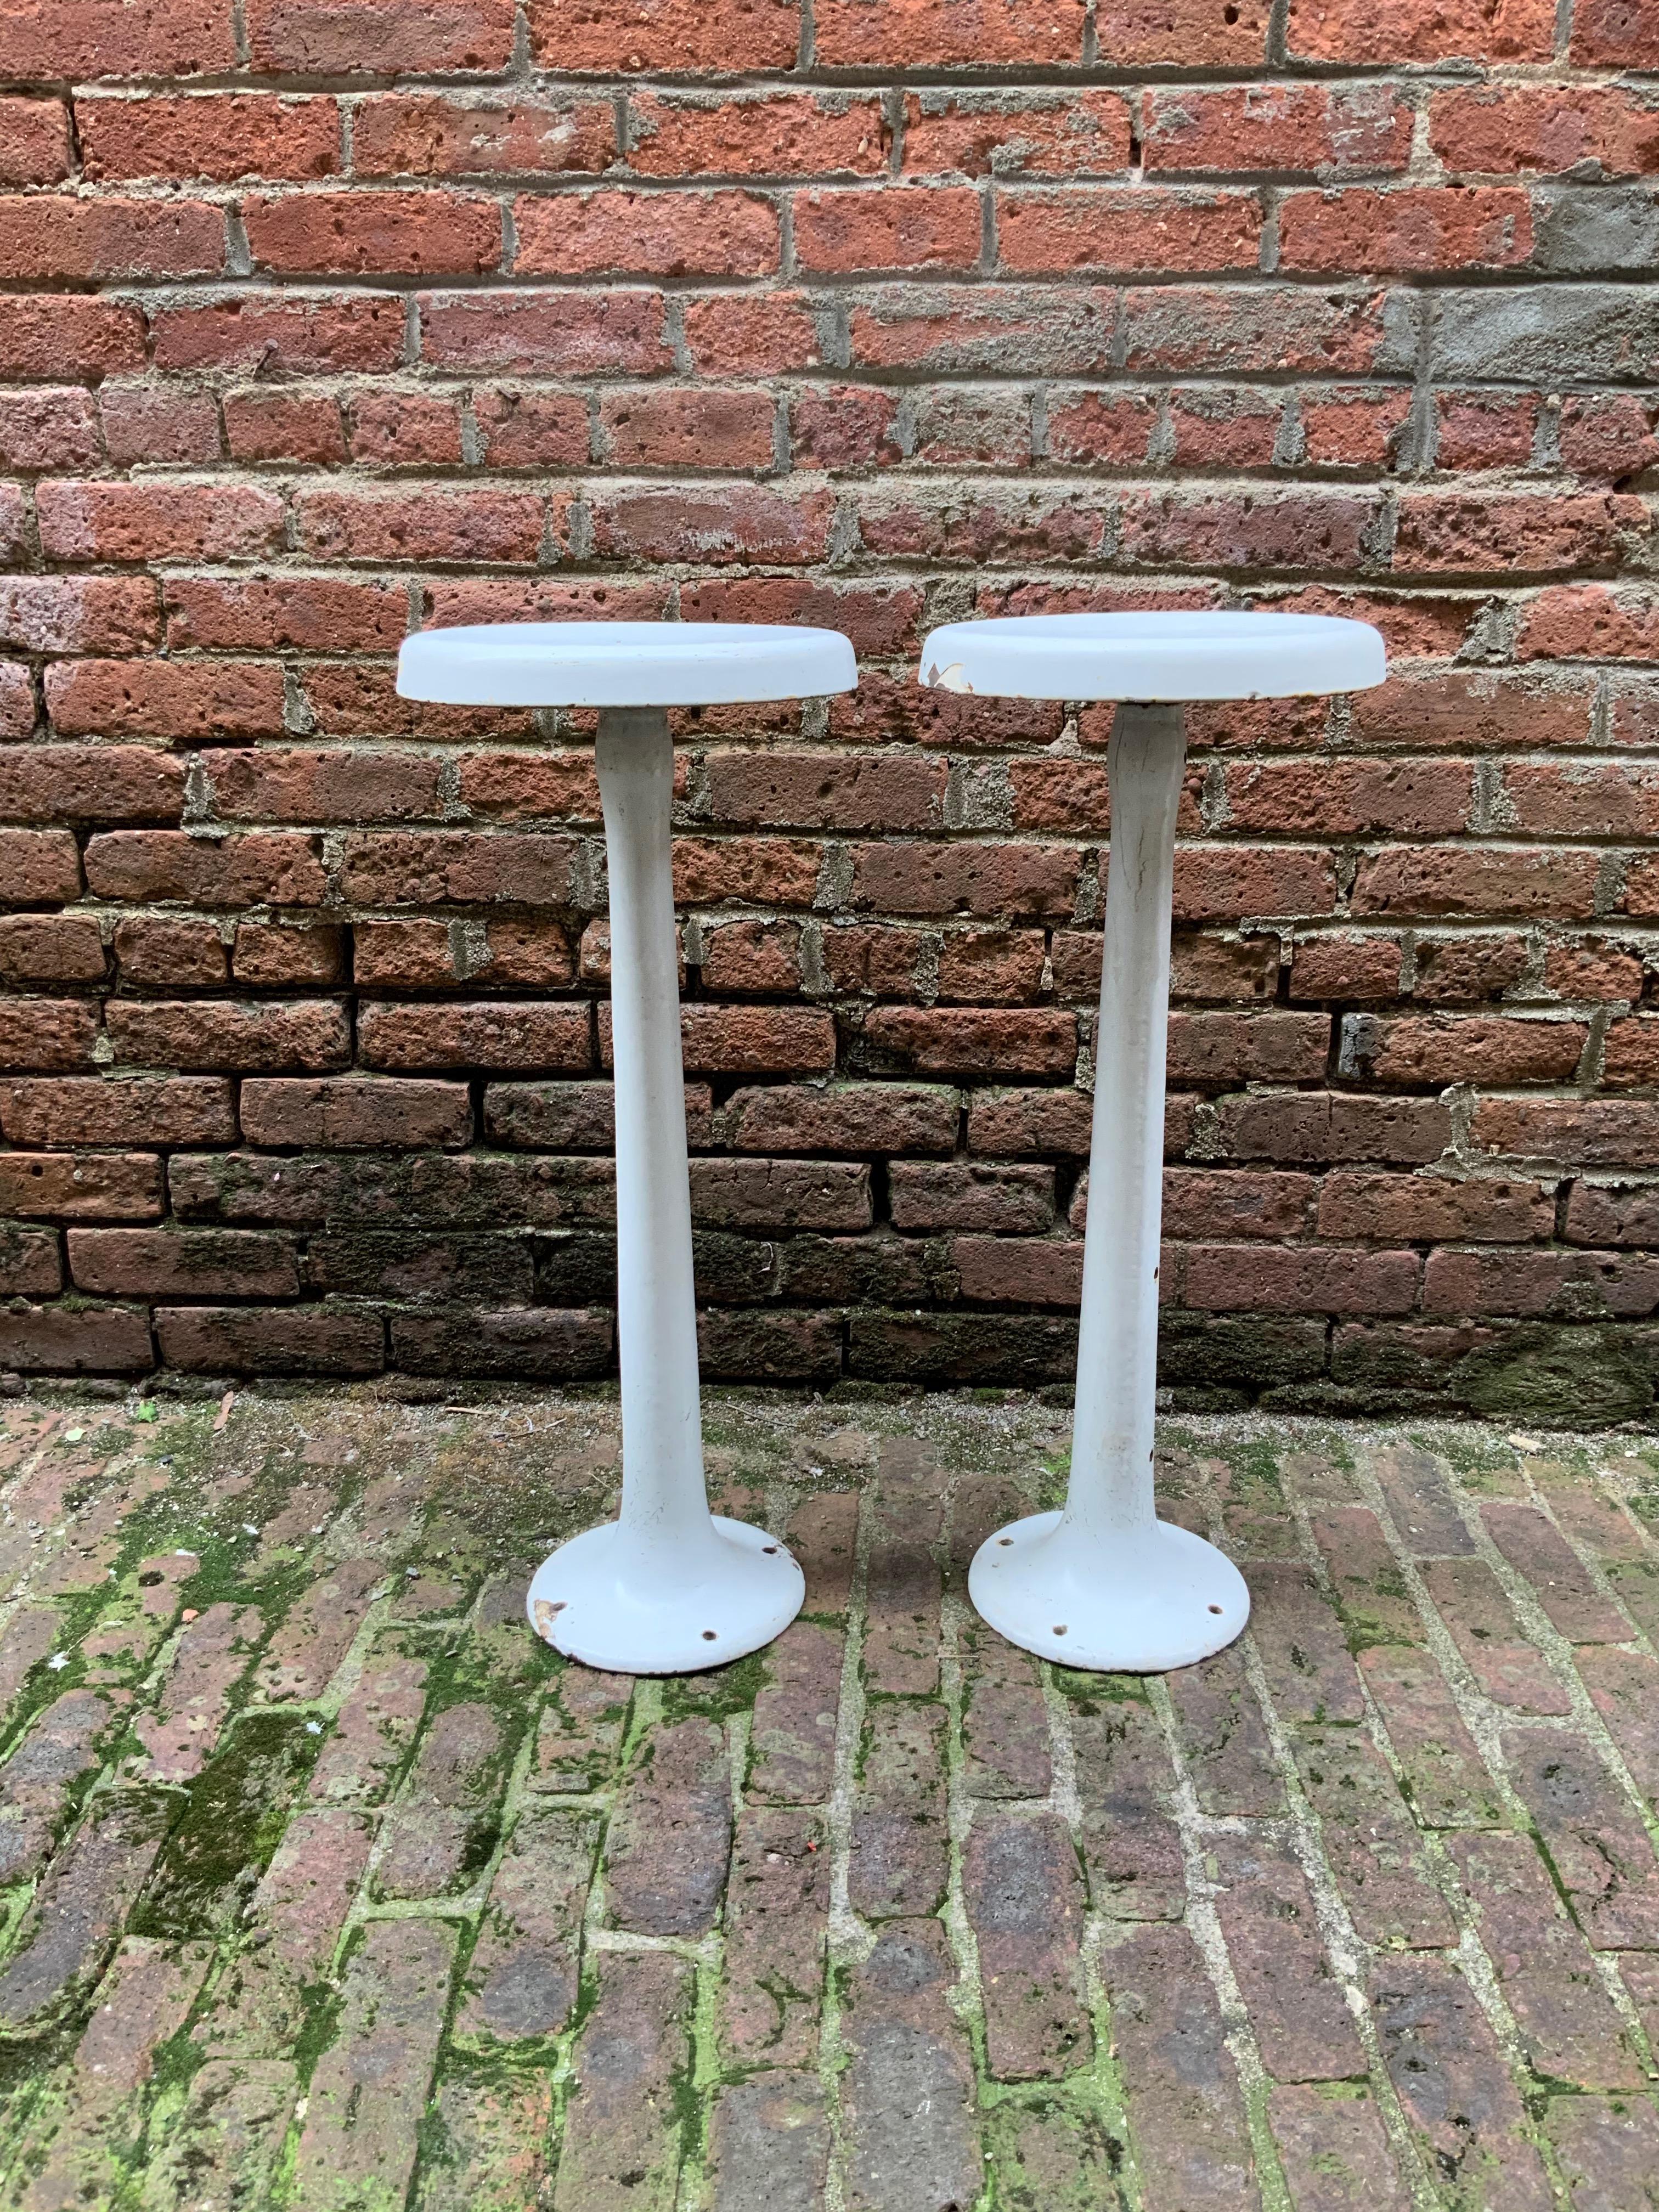 White porcelain enamel and cast iron swivel bar stools, circa 1920-1930. The bases can be fastened to the floor for stability. Good distressed condition with some rusting on the undersides and enamel chips (see photos). Possibly missing a footrest